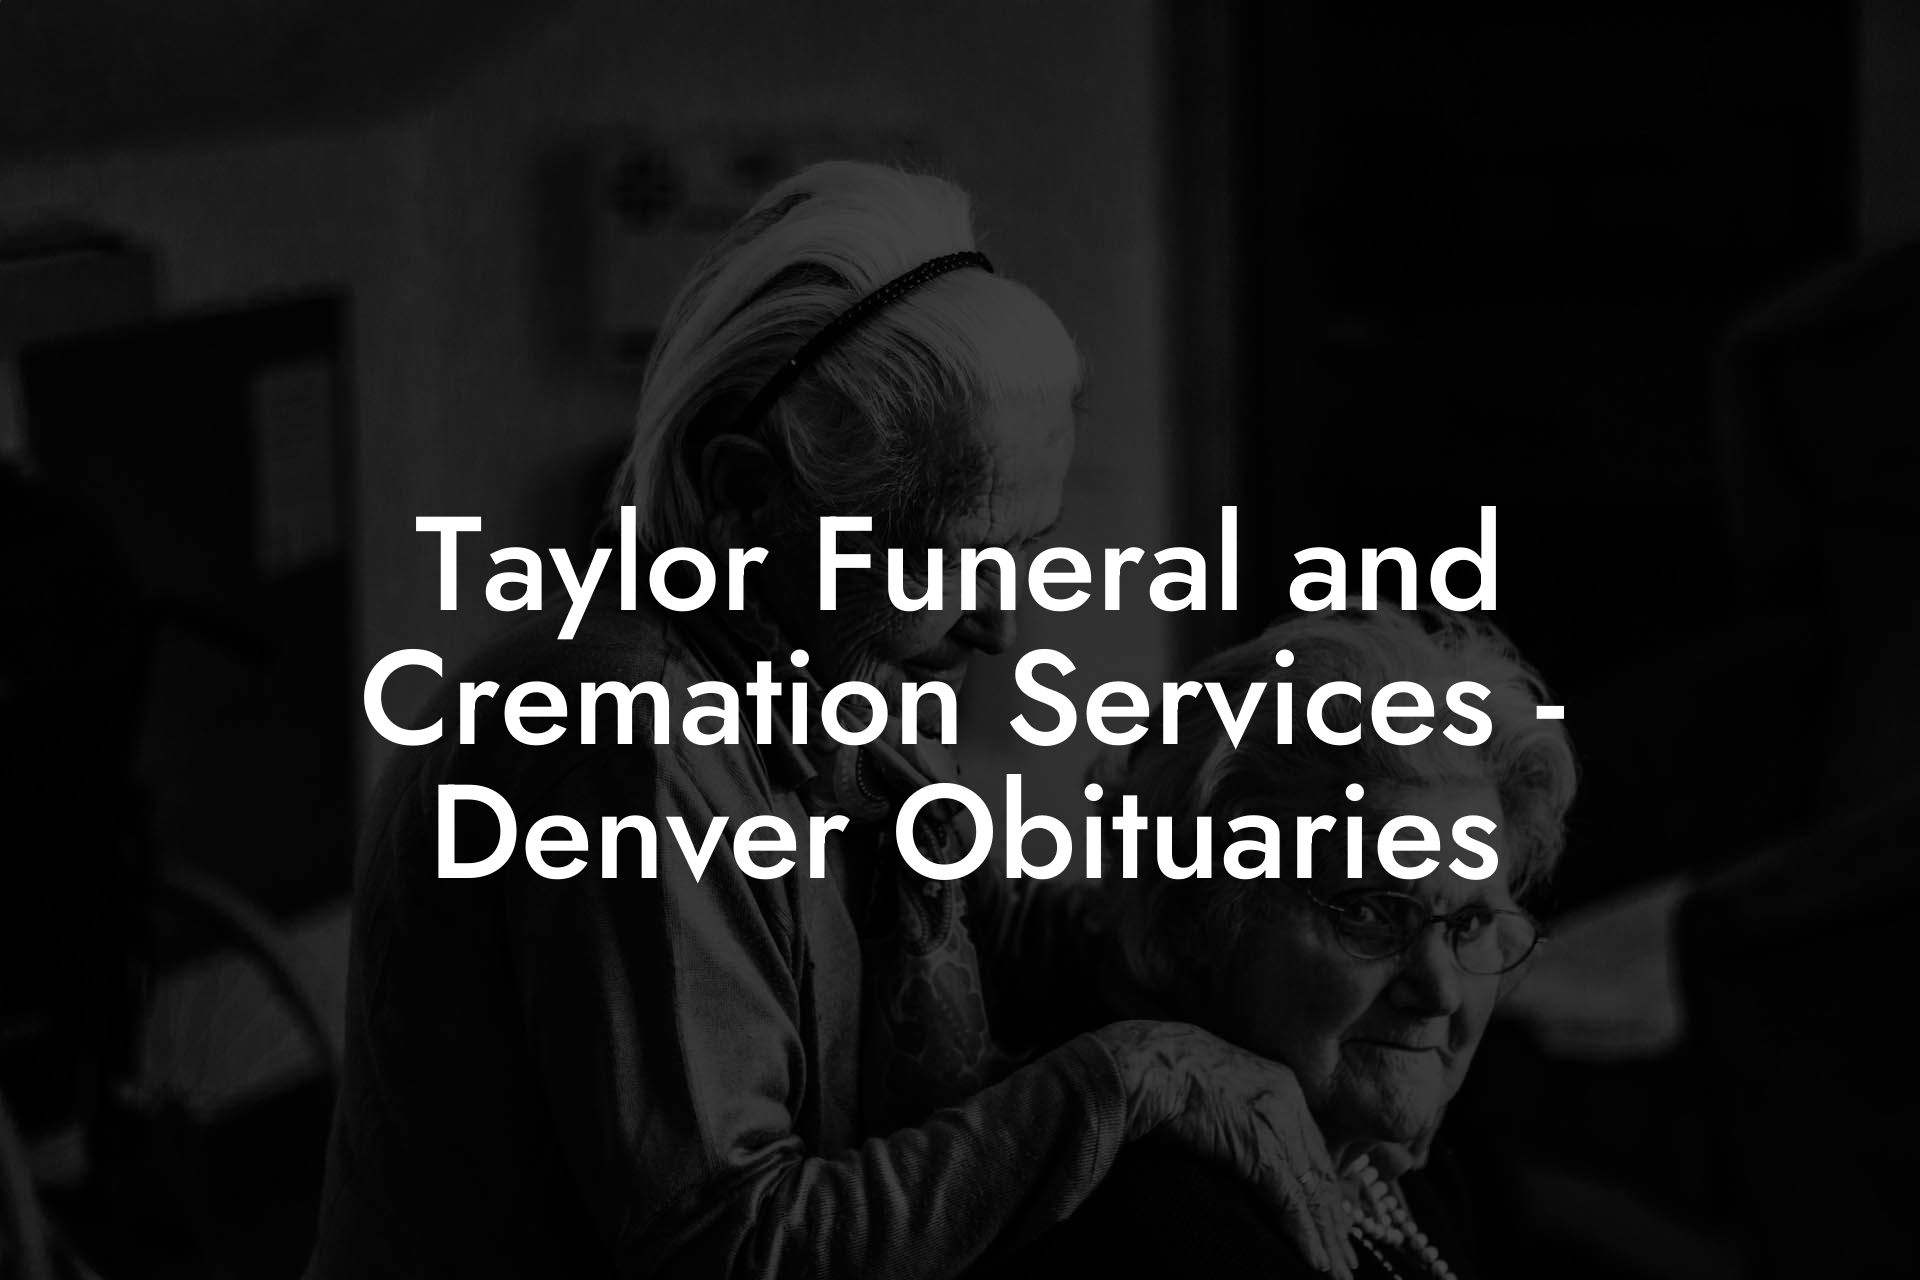 Taylor Funeral and Cremation Services - Denver Obituaries